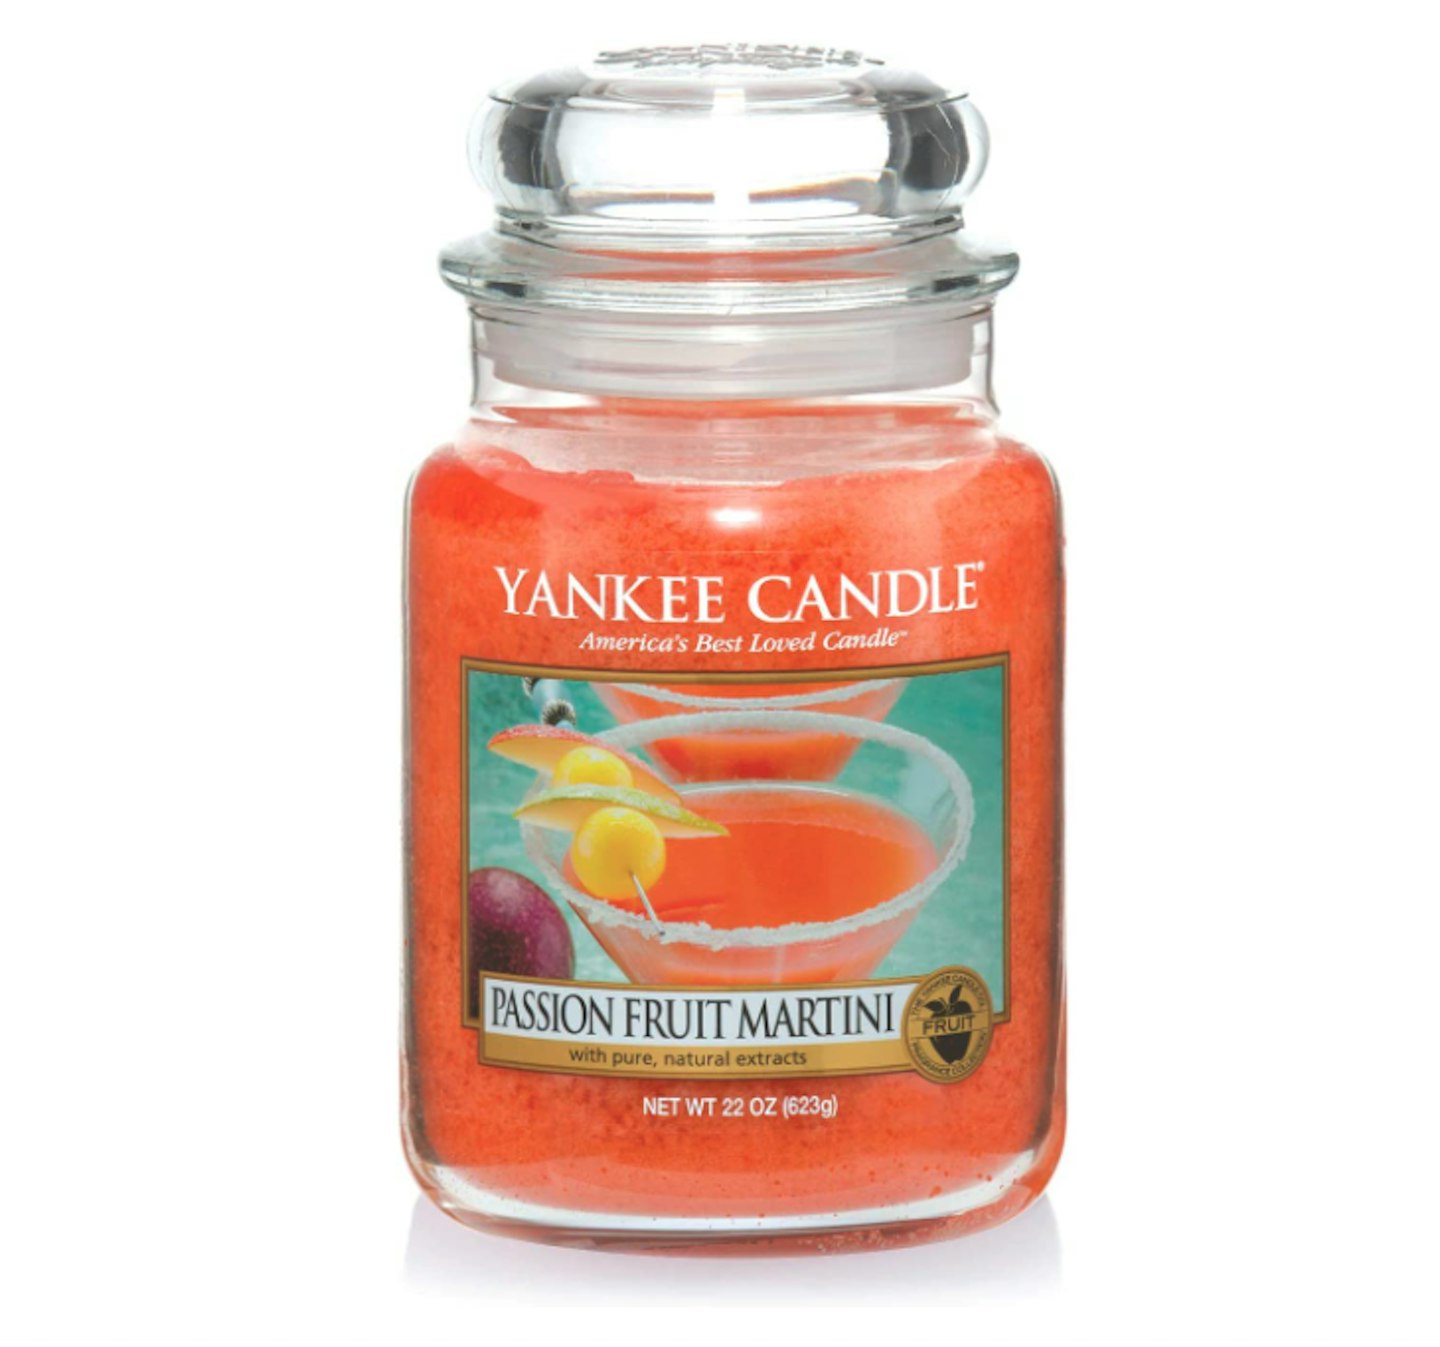 Yankee Candle Large Jar Scented Candle, Passion Fruit Martini